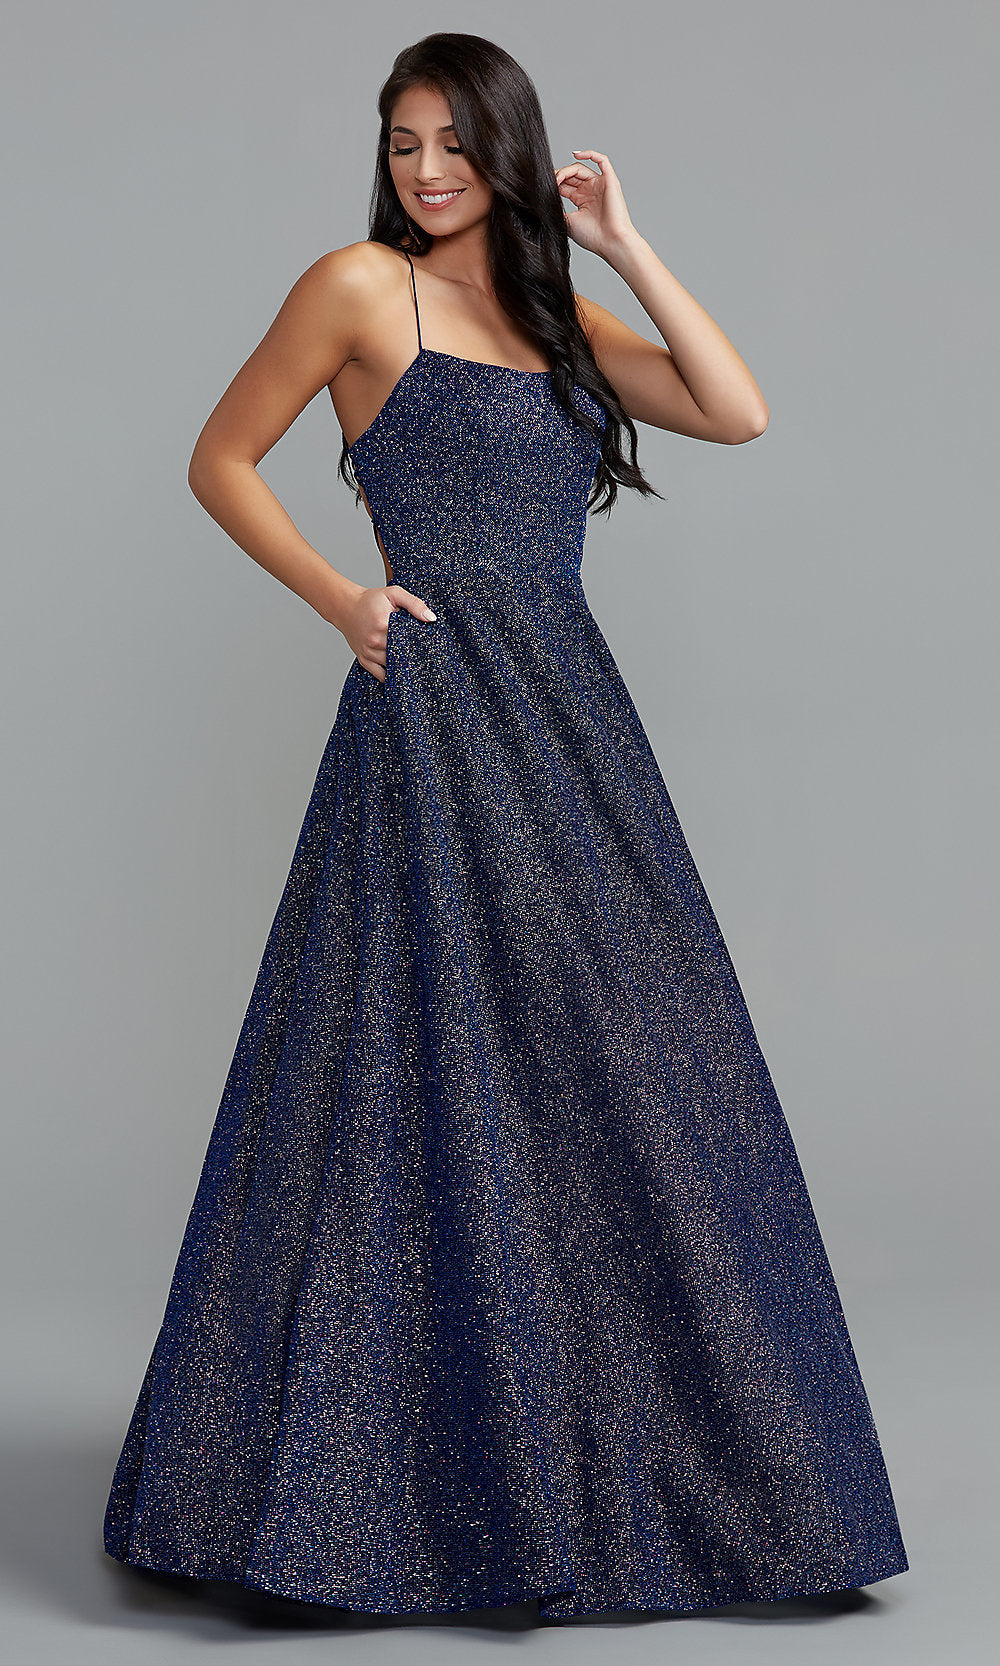  Long Glitter A-Line Prom Ball Gown with Pockets